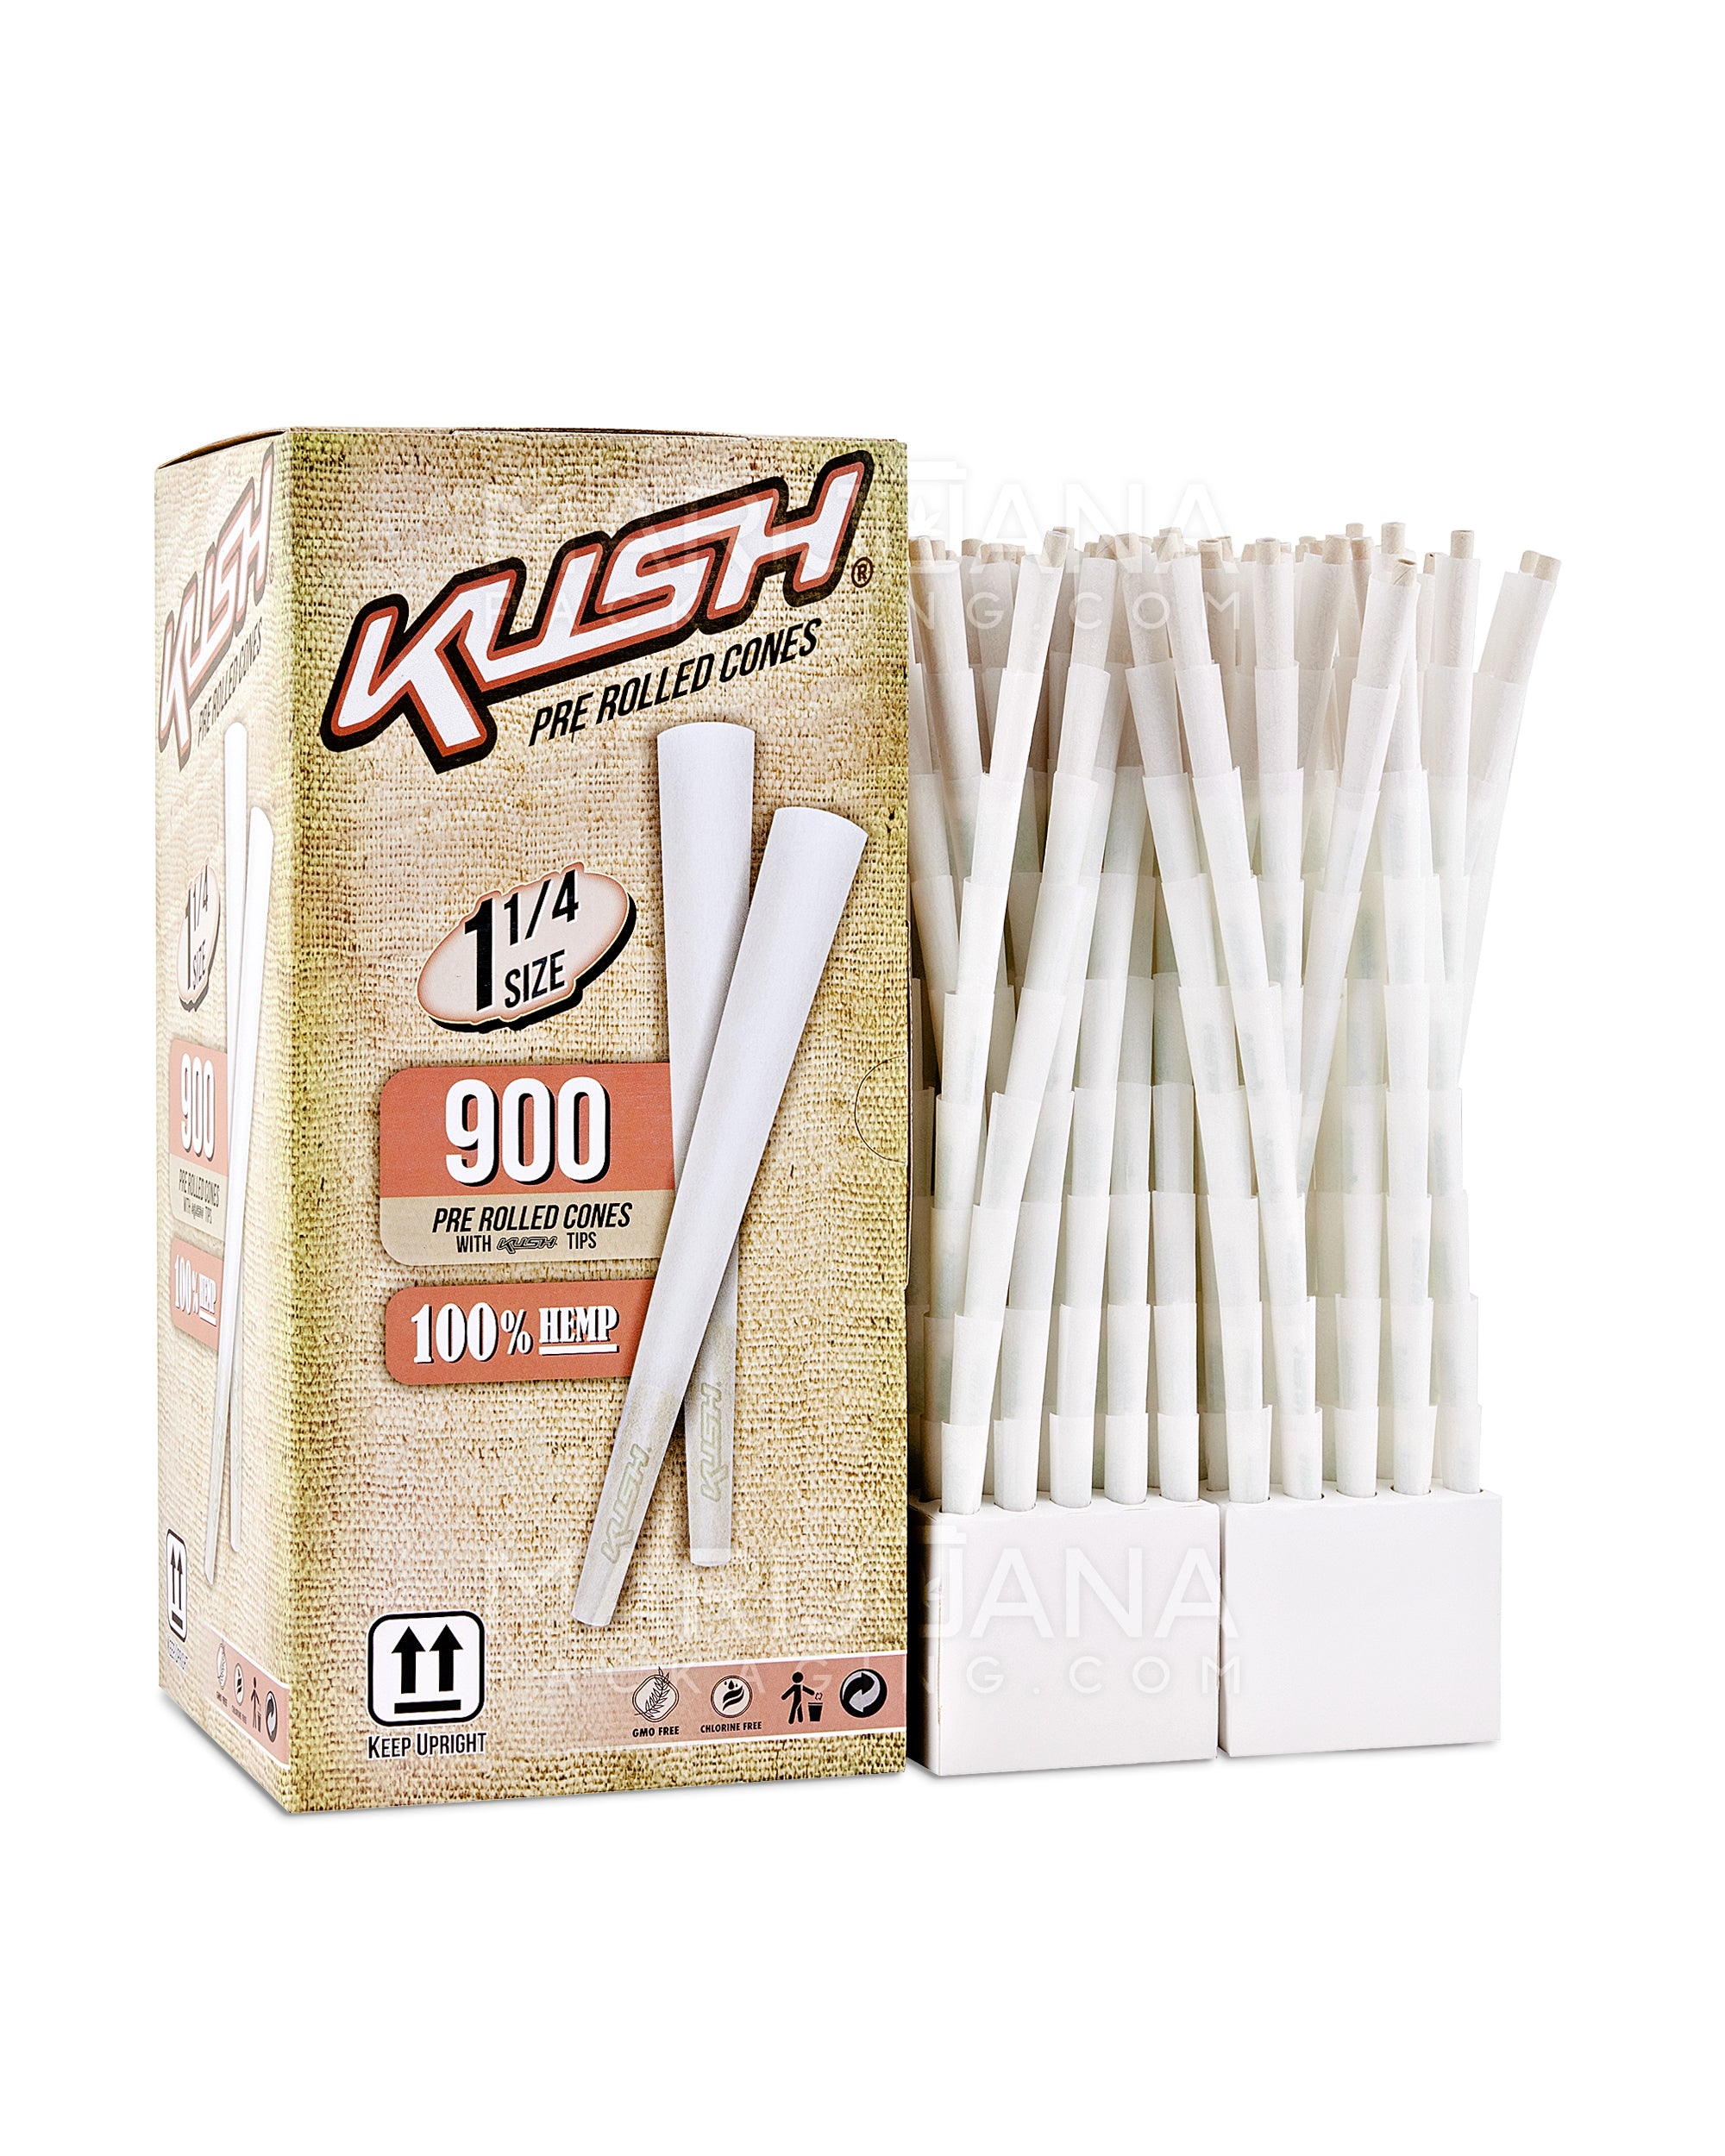 KUSH | Bleached 1 1/4 Size Pre-Rolled Cones w/ Filter Tip | 84mm - Hemp Paper - 900 Count - 2